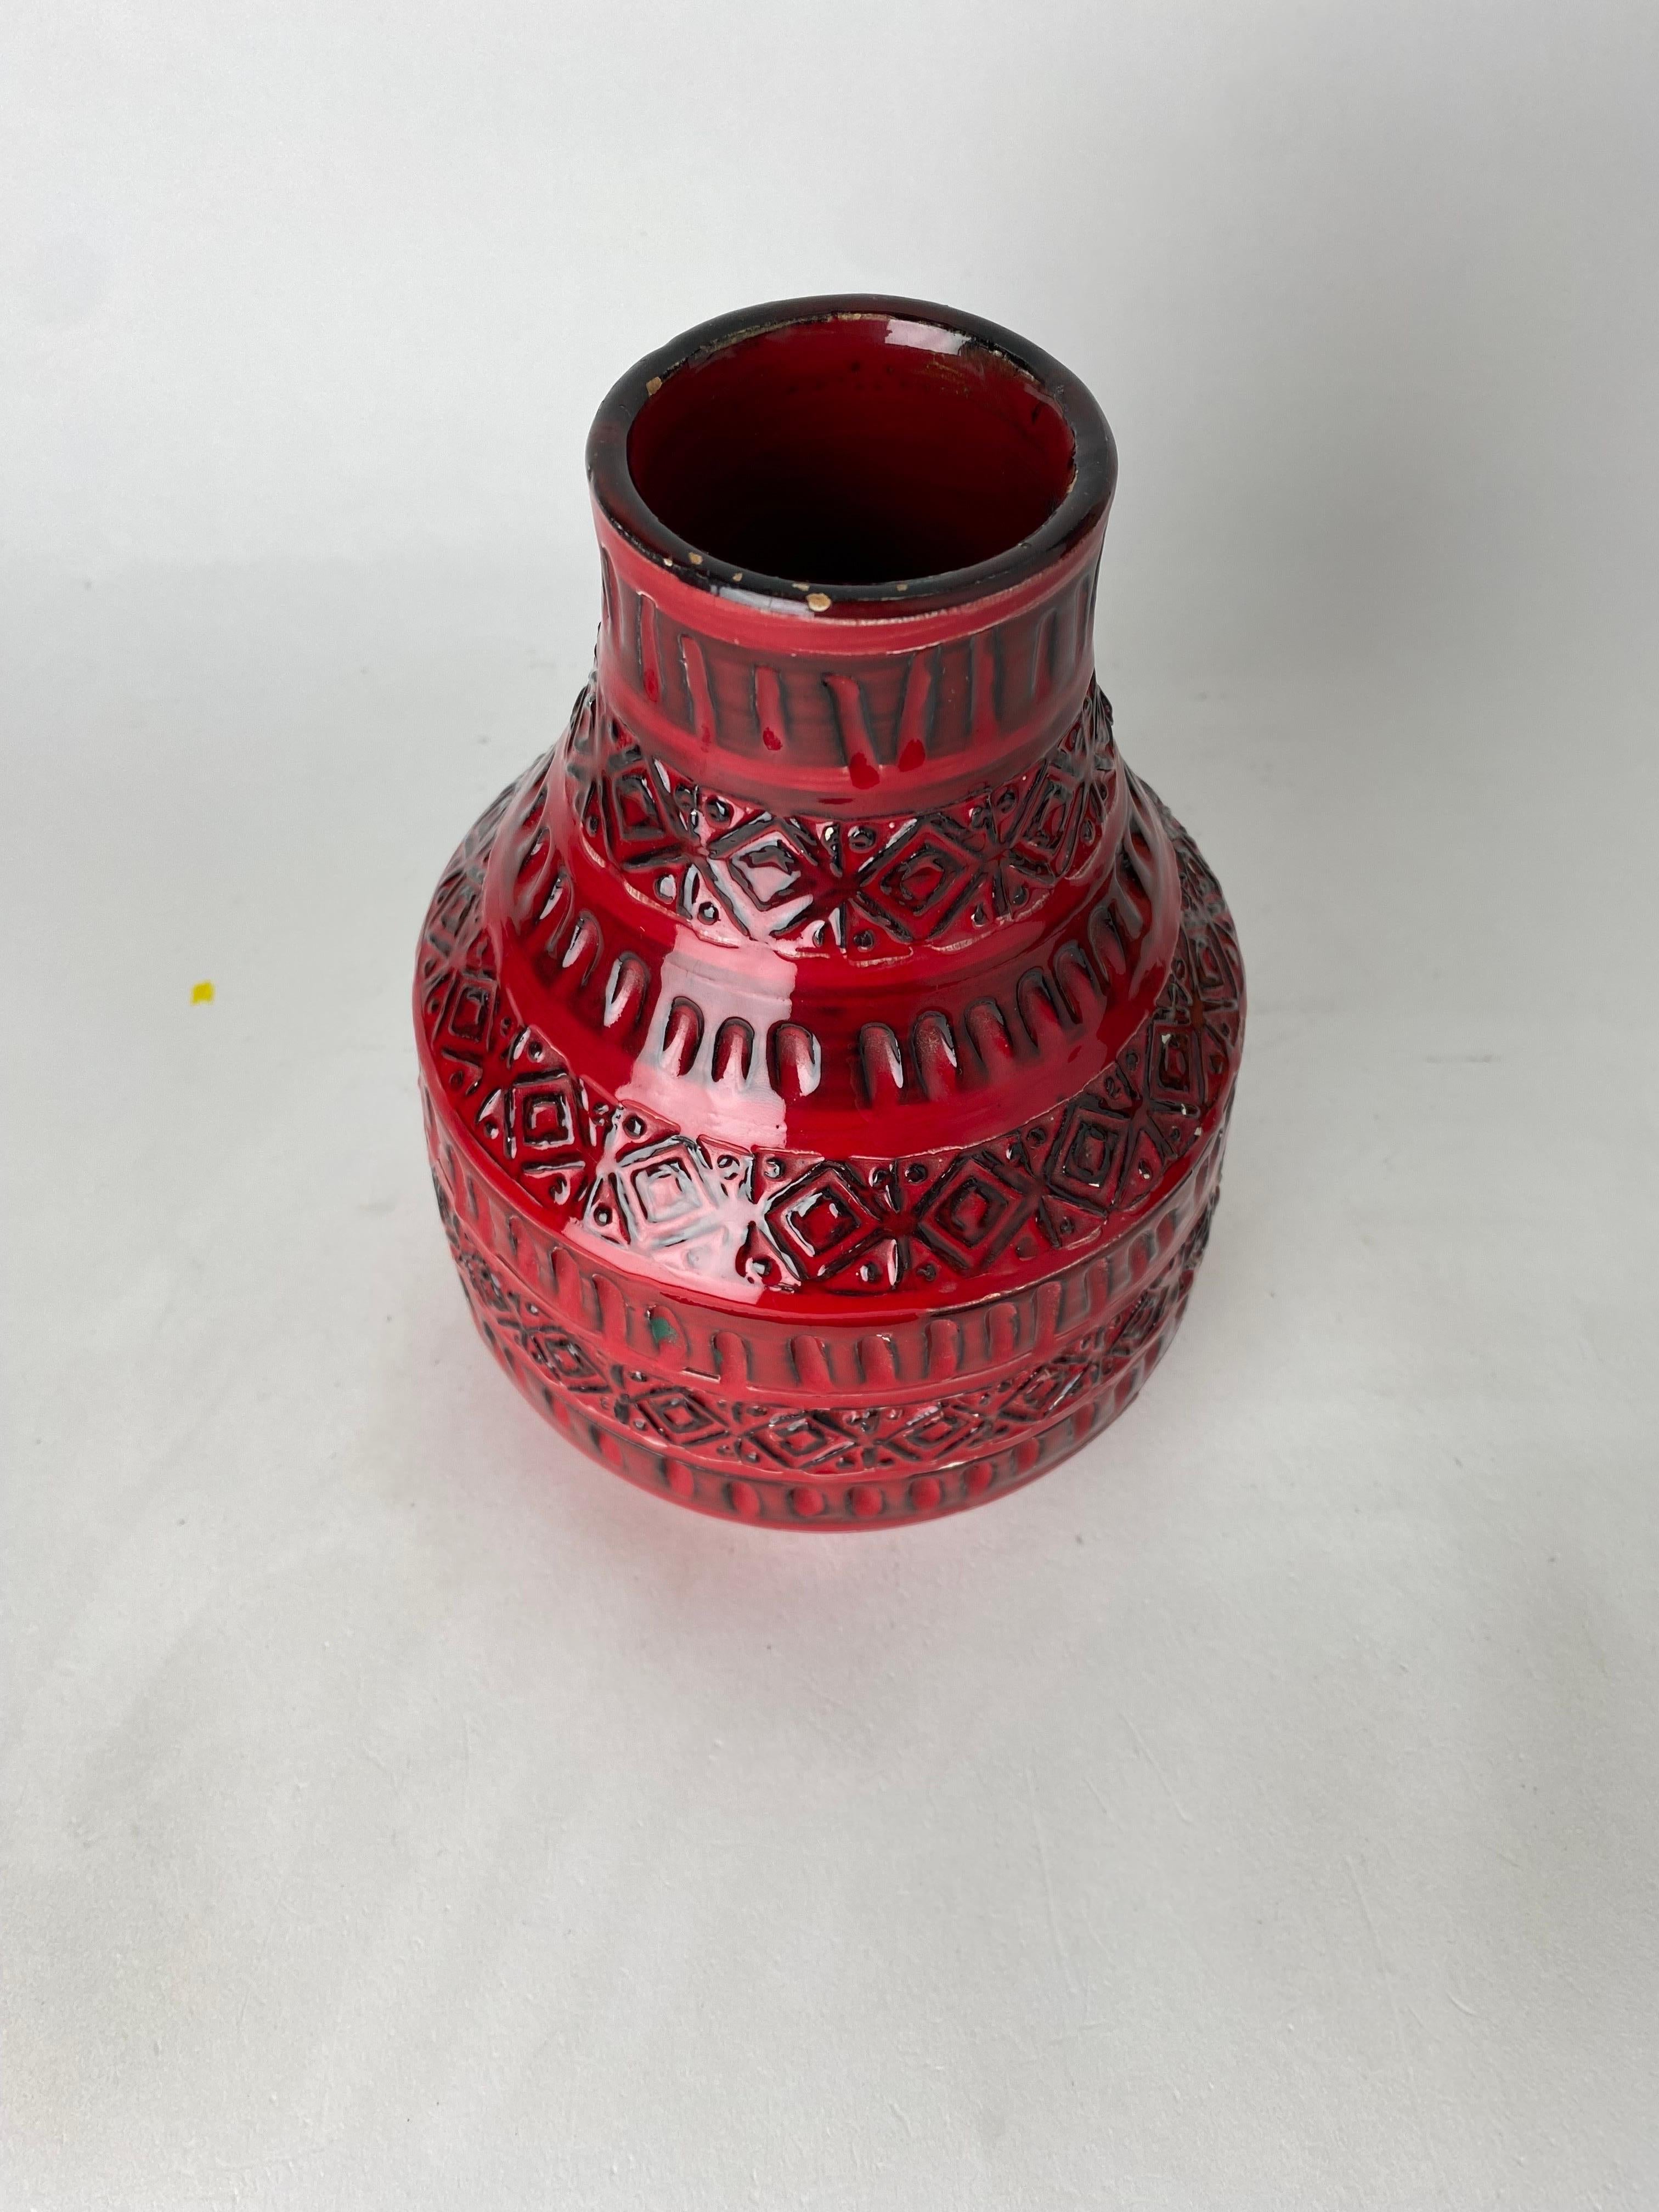 Beautiful 1960s red vase with the design and creation attributed to Aldo Londi and Bitossi. The vase is marked on the bottom with 